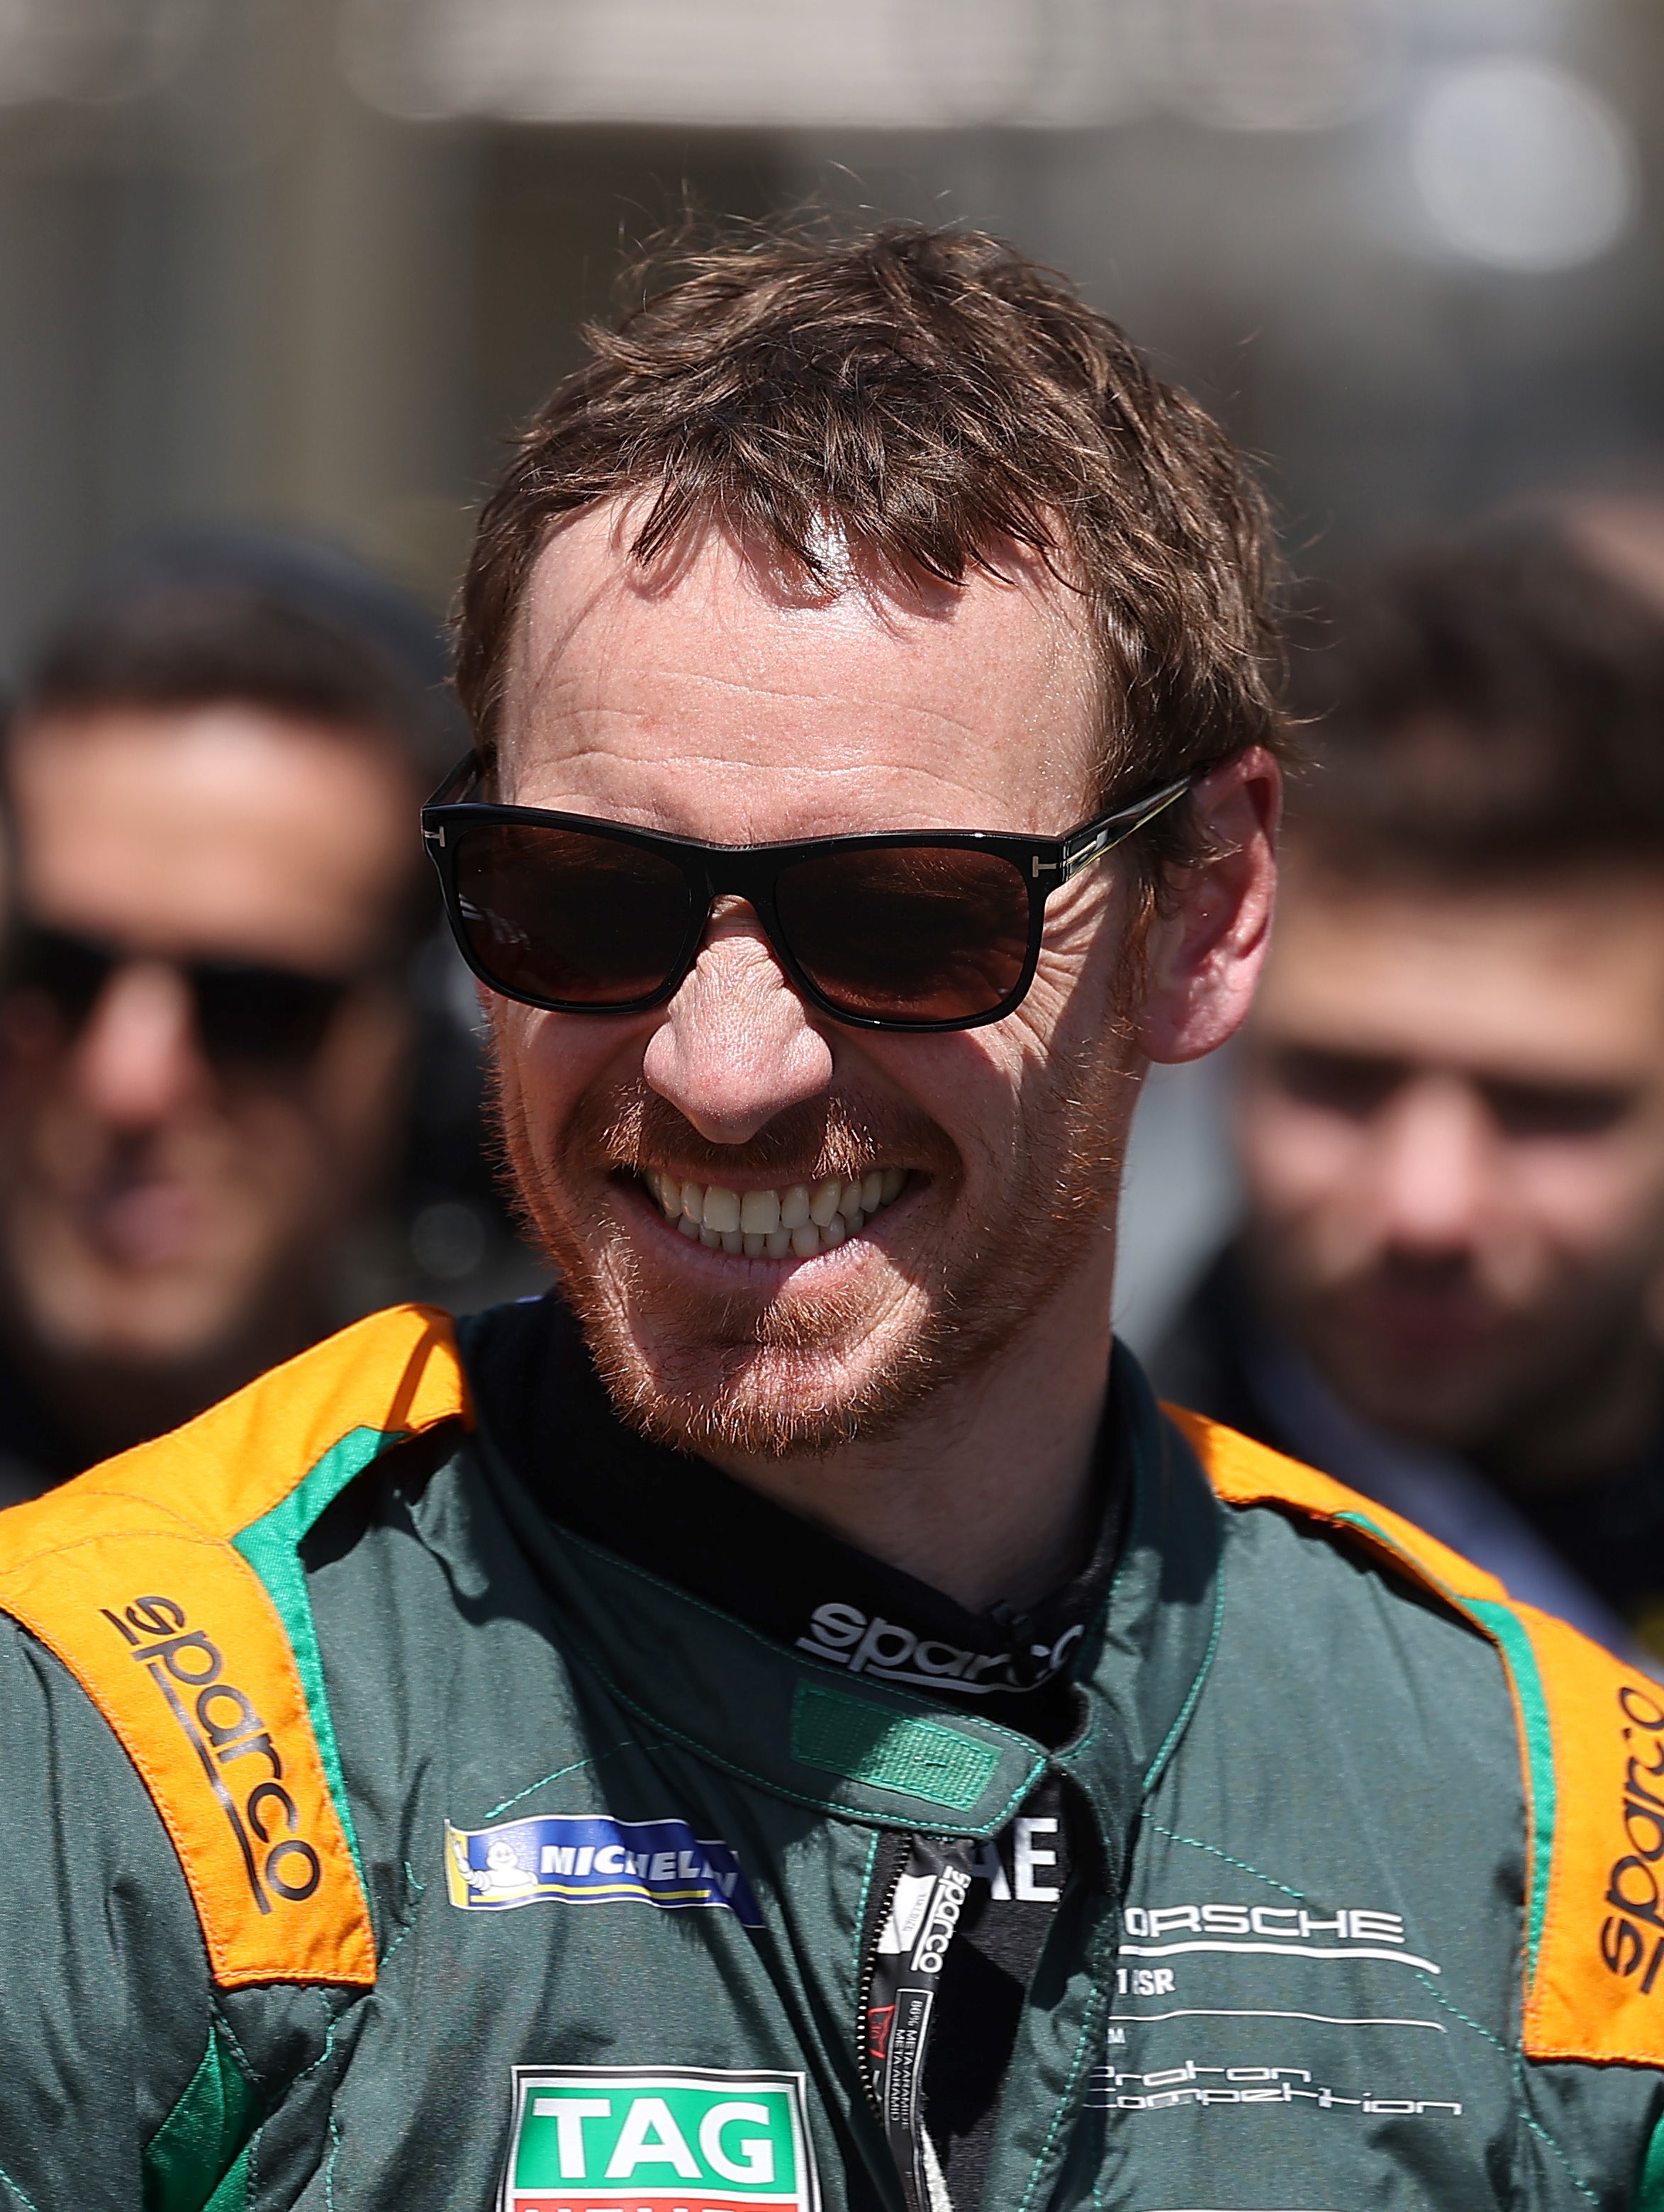 Close-up of Michael smiling and wearing a uniform as a race car driver